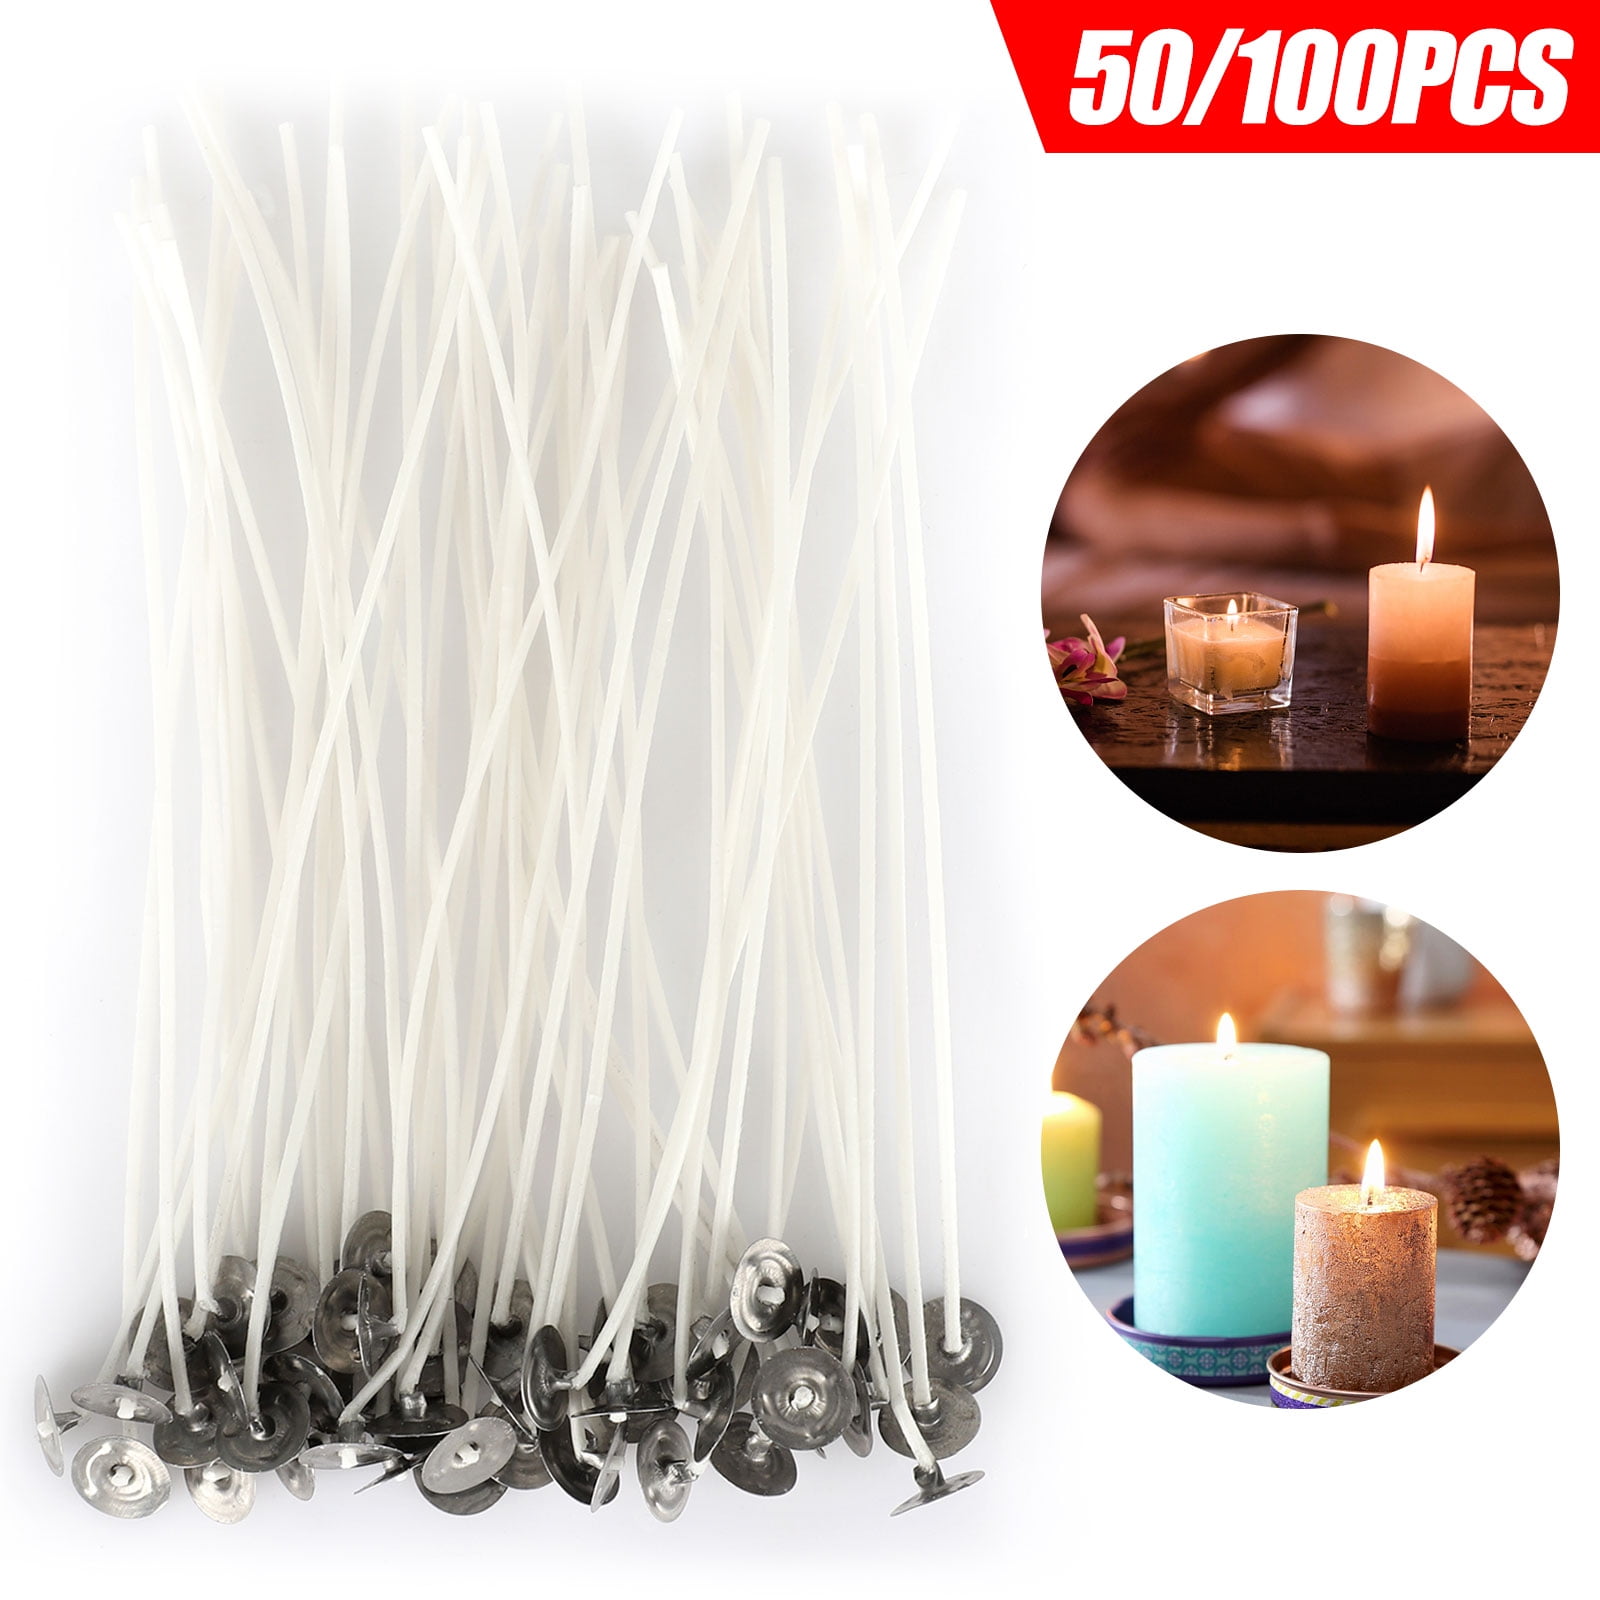 Candle DIY Hacks E-Book Included Candle Wicks for Candle Making Cozyours 8 inch Organic Hemp Candle Wicks 100 pcs; 100% Natural Beeswax; PRE-Waxed Tabbed 